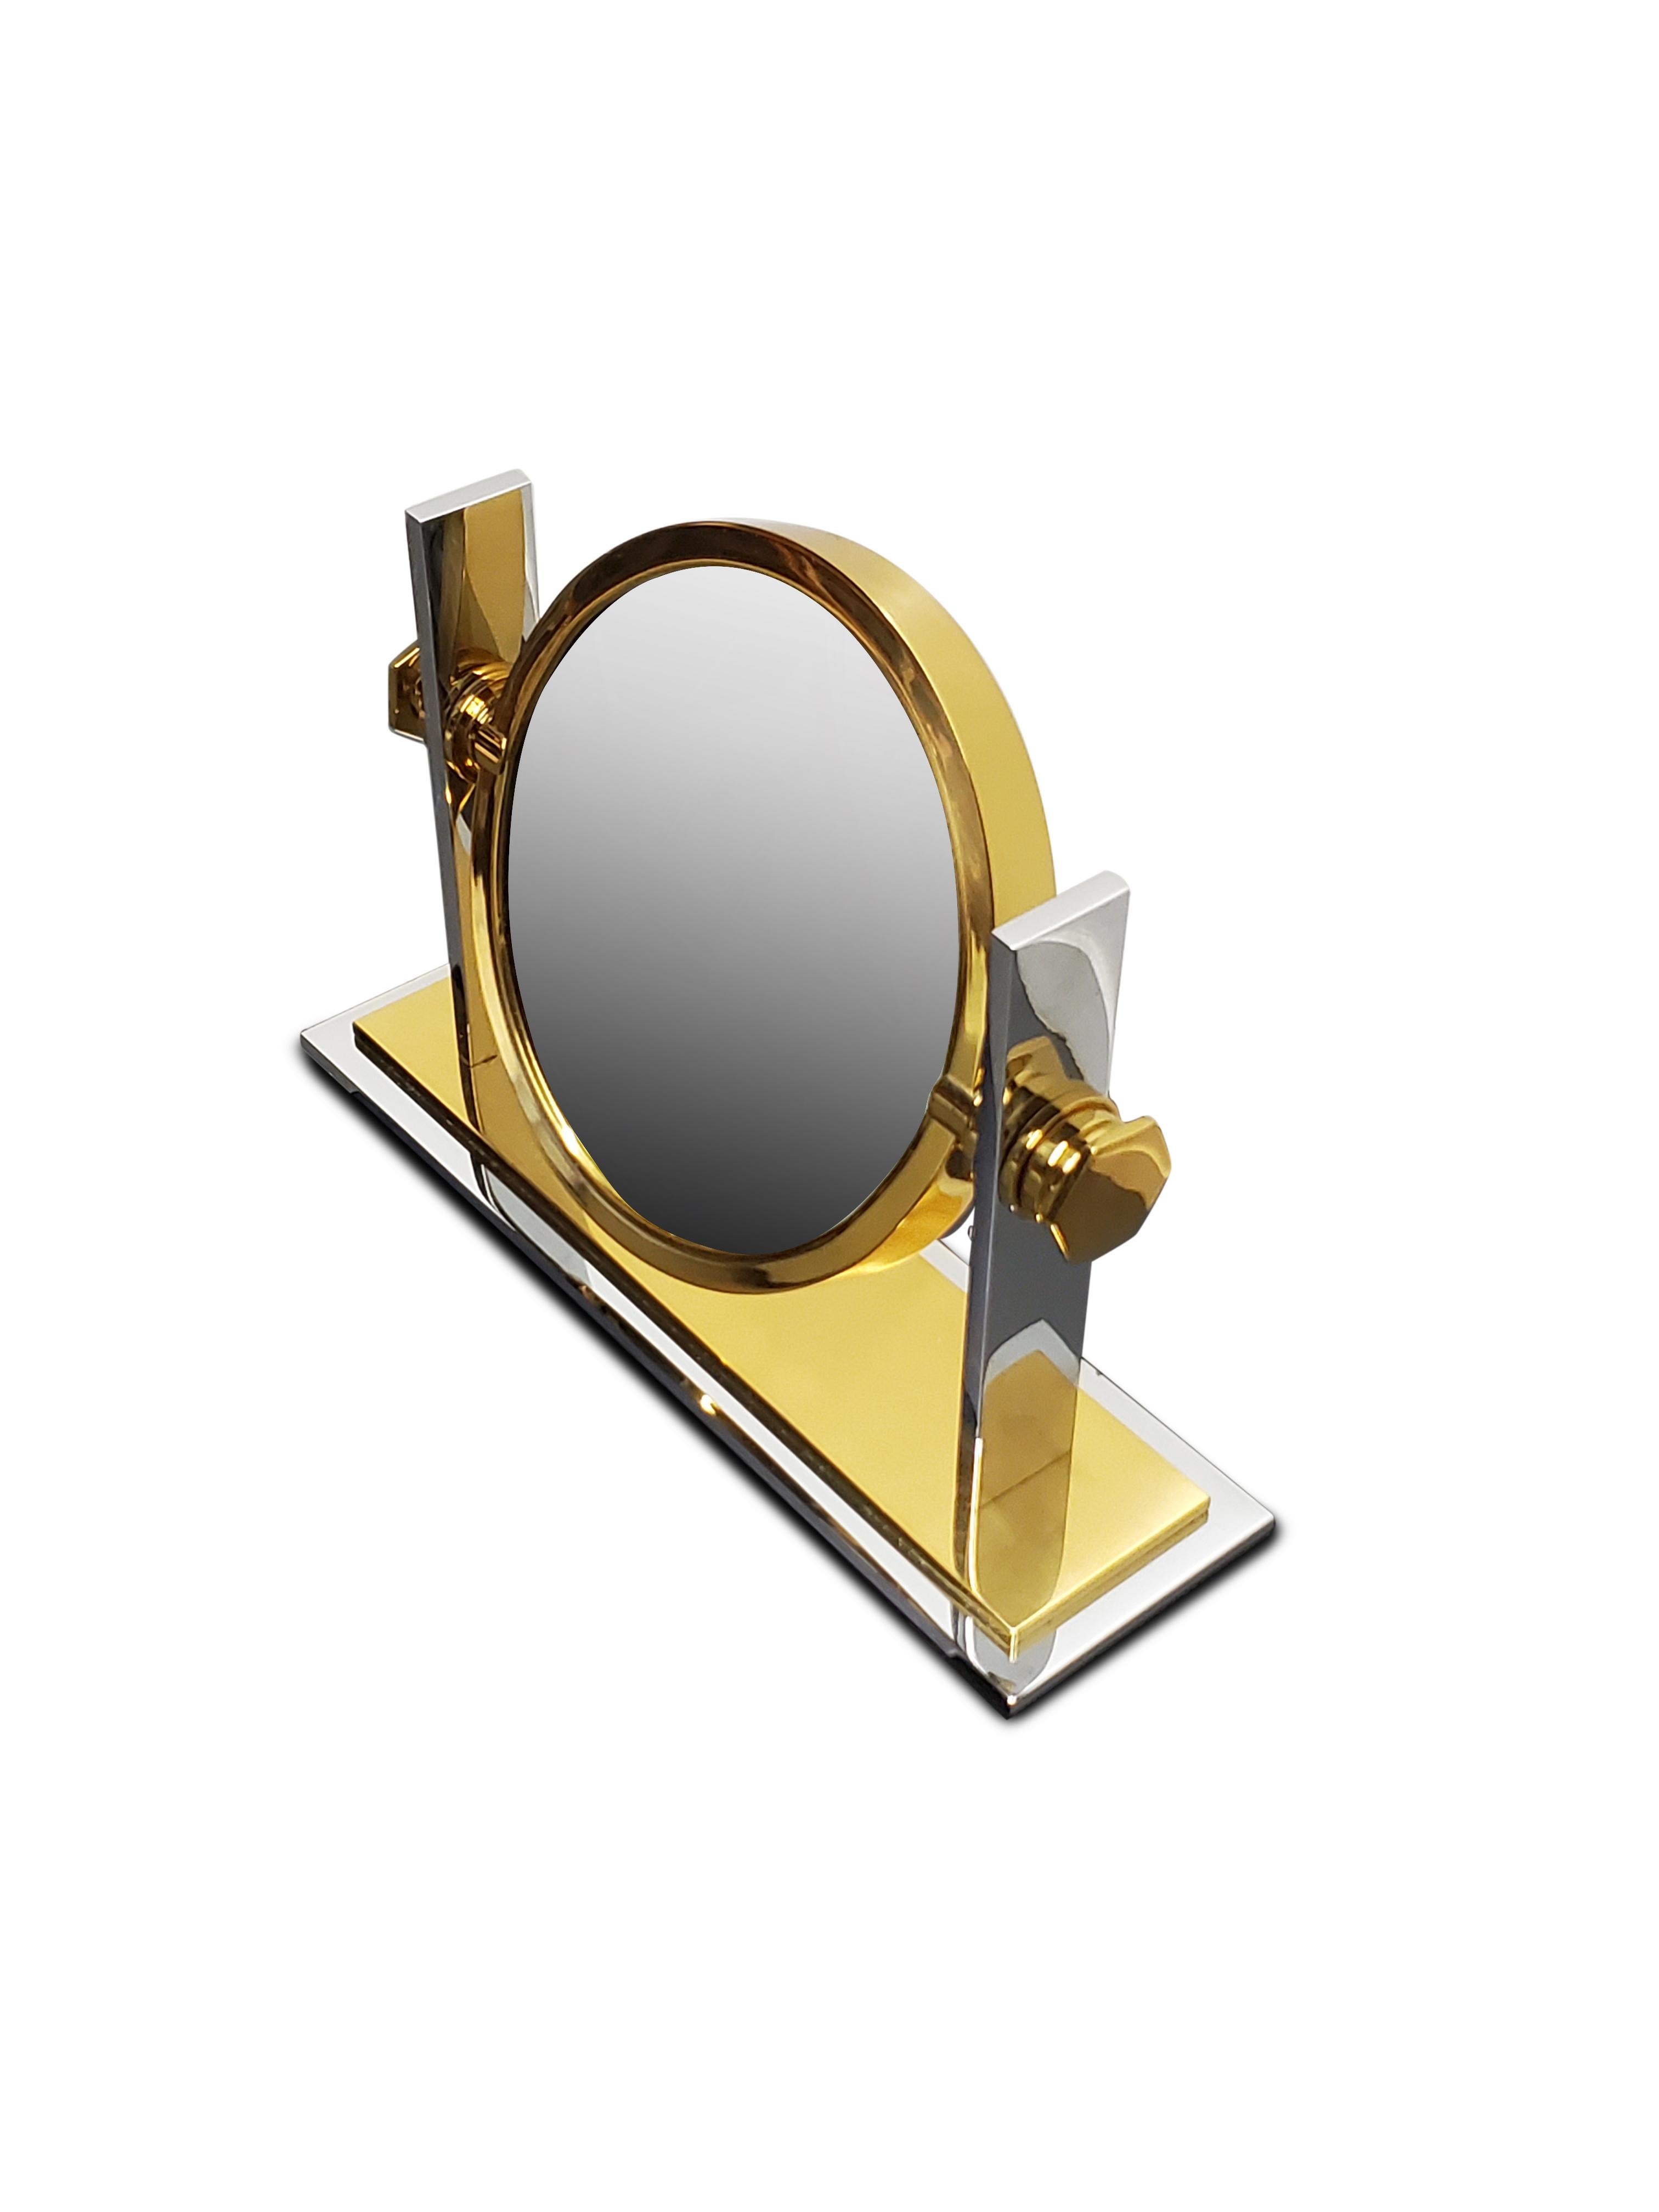 Karl Springer Brass and Nickel Vanity Mirror In Good Condition For Sale In Middlesex, NJ